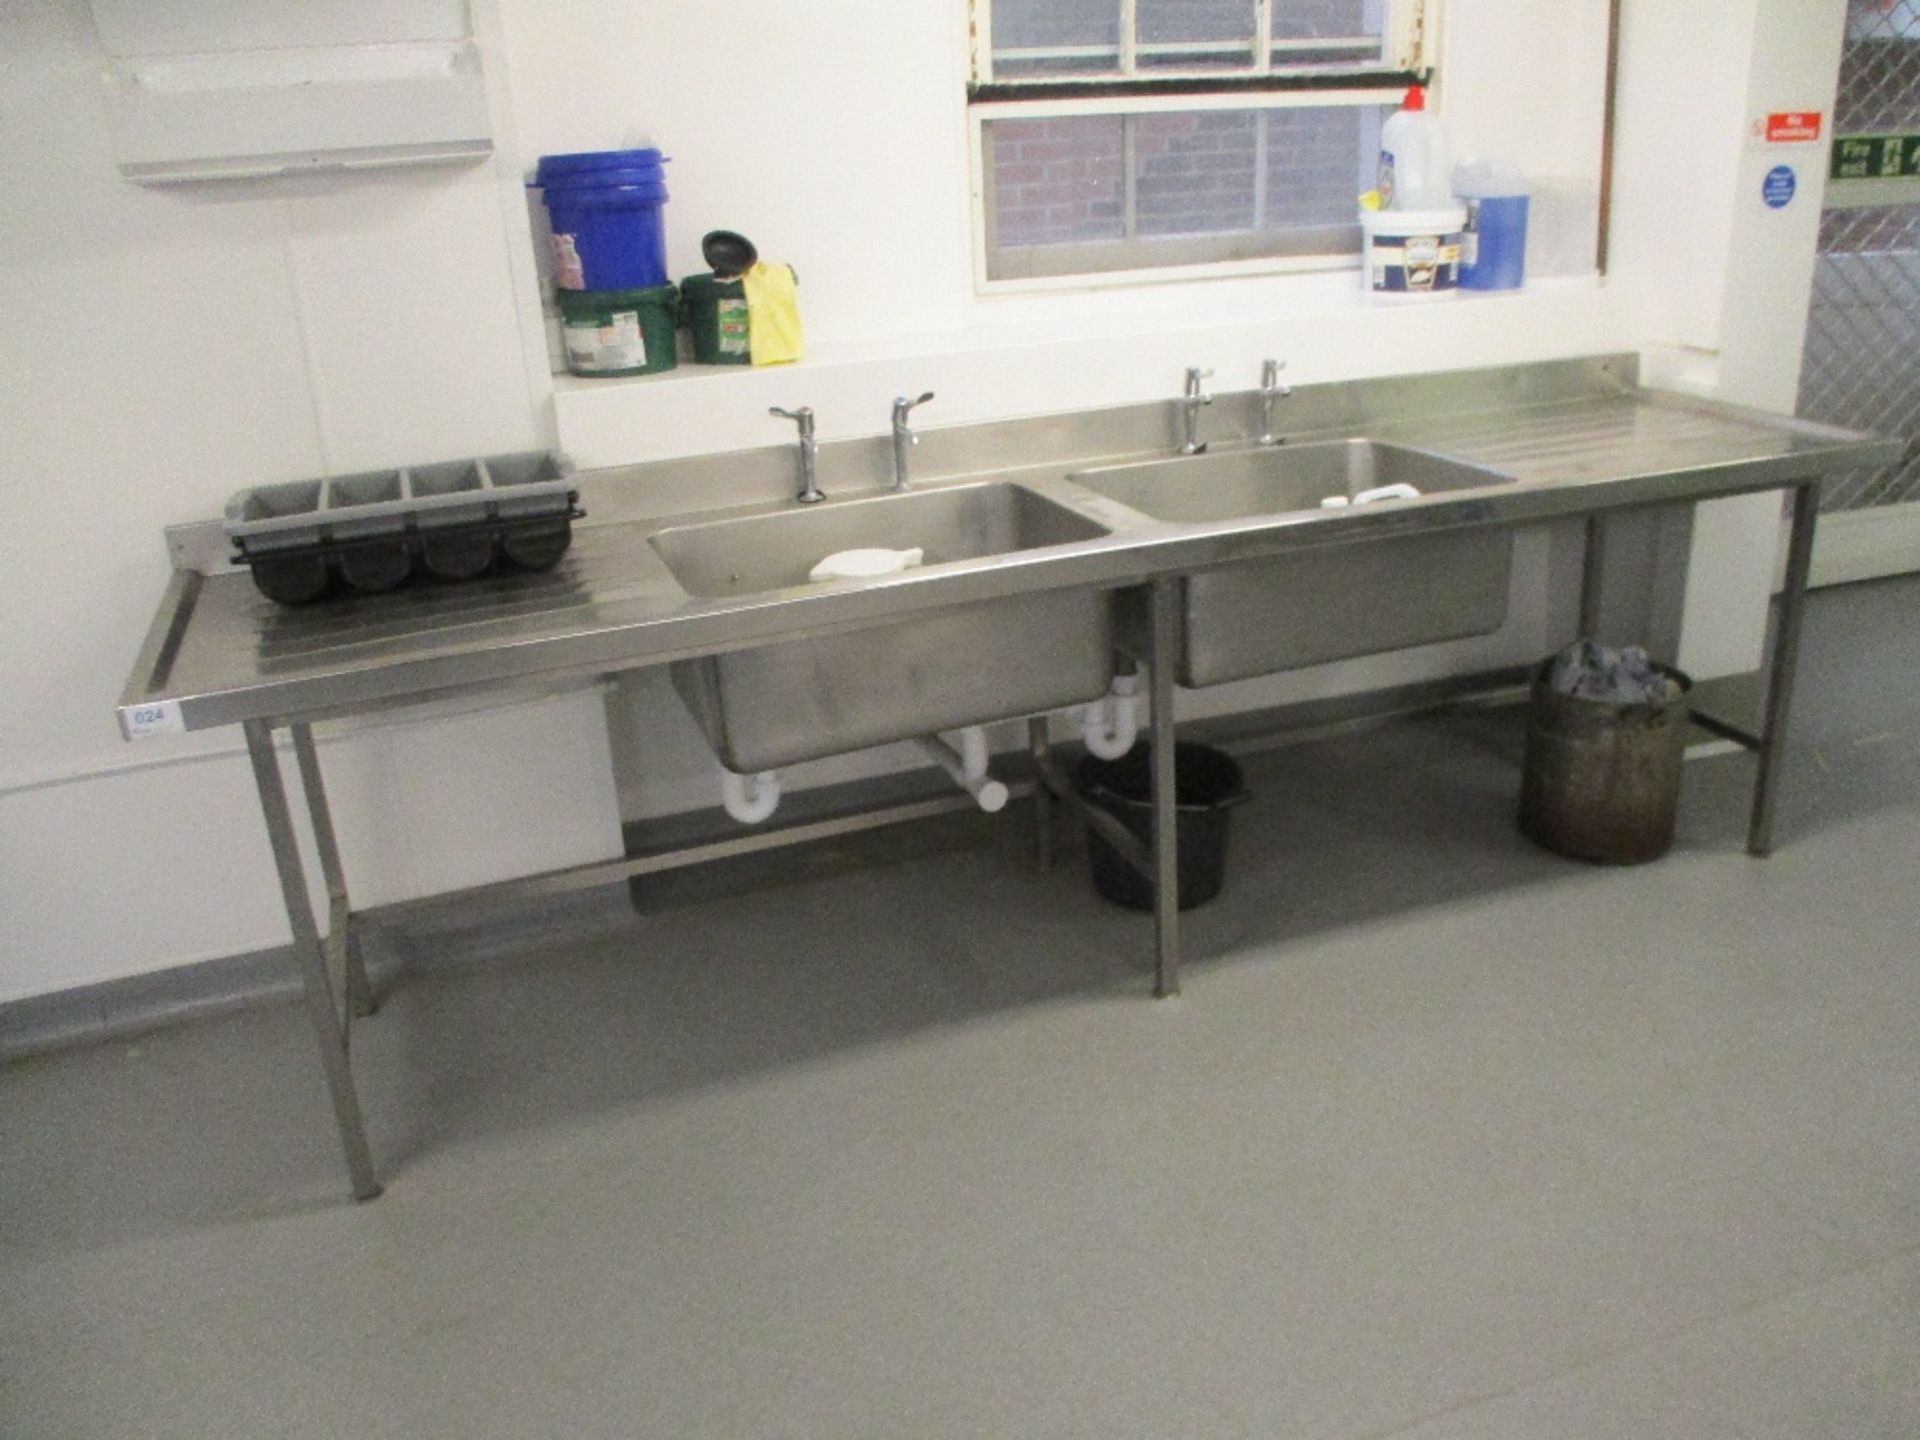 Stainless Steel Twin Sink - Image 3 of 3